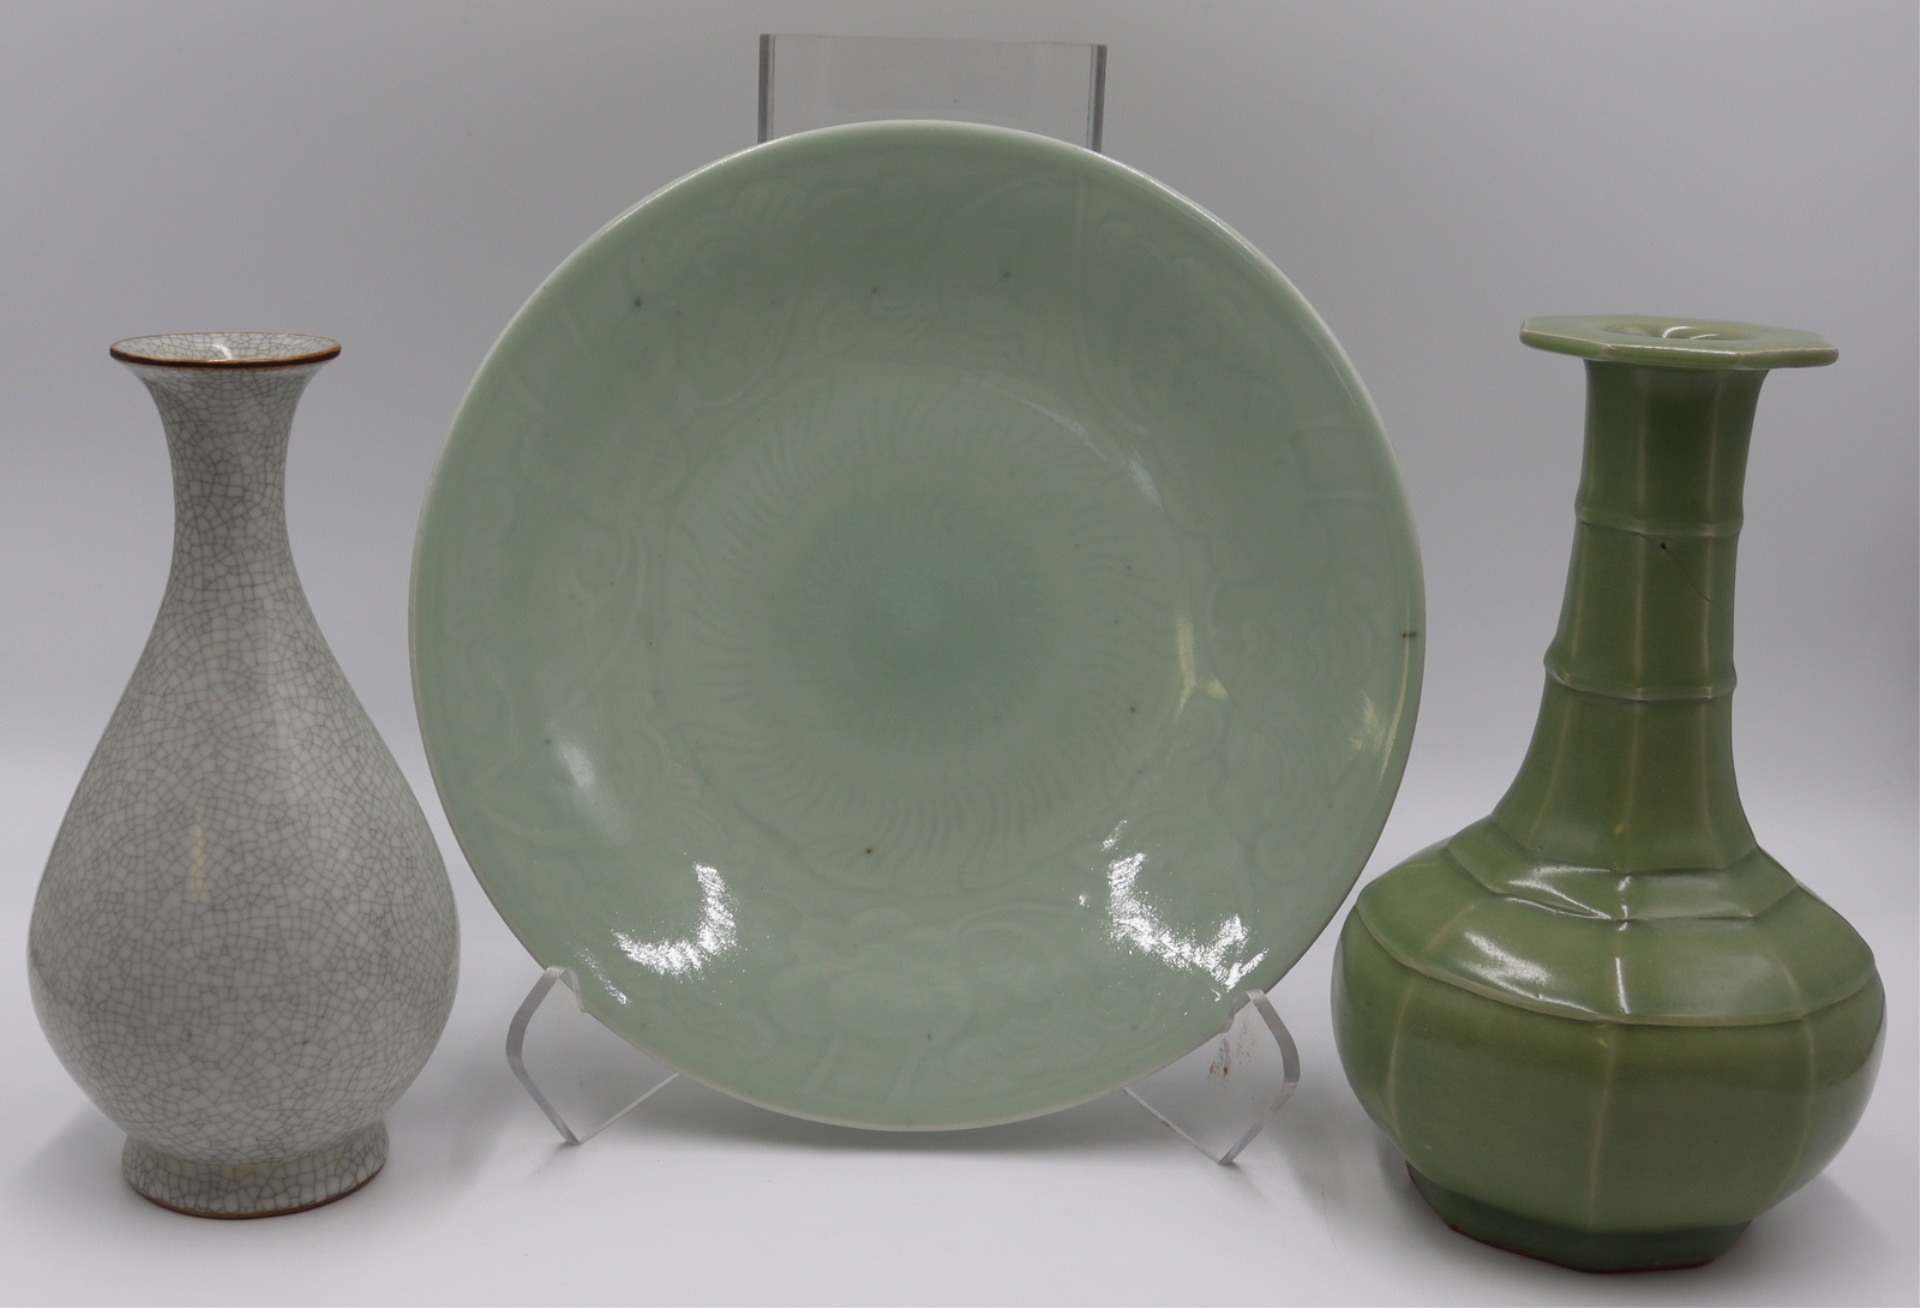  3 CHINESE CELADON ITEMS Includes 3bde6e